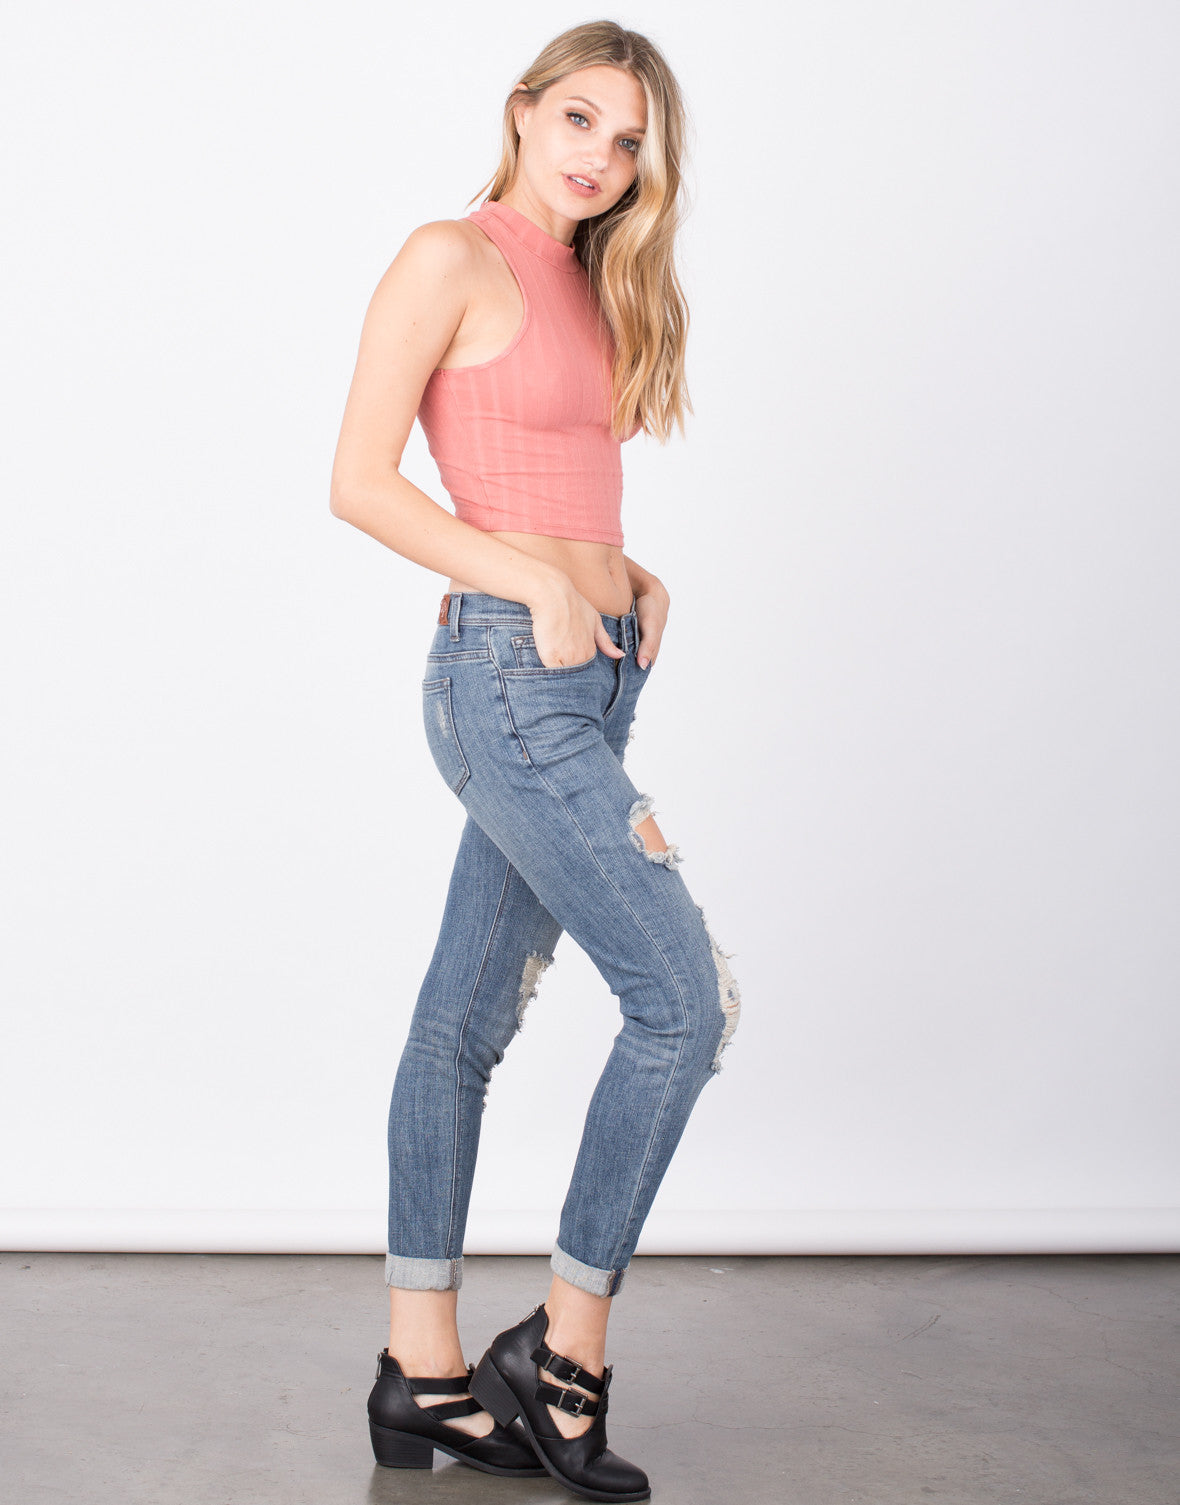 Download To the Neck Cropped Tank - Mock Neck Crop Top - Ribbed ...